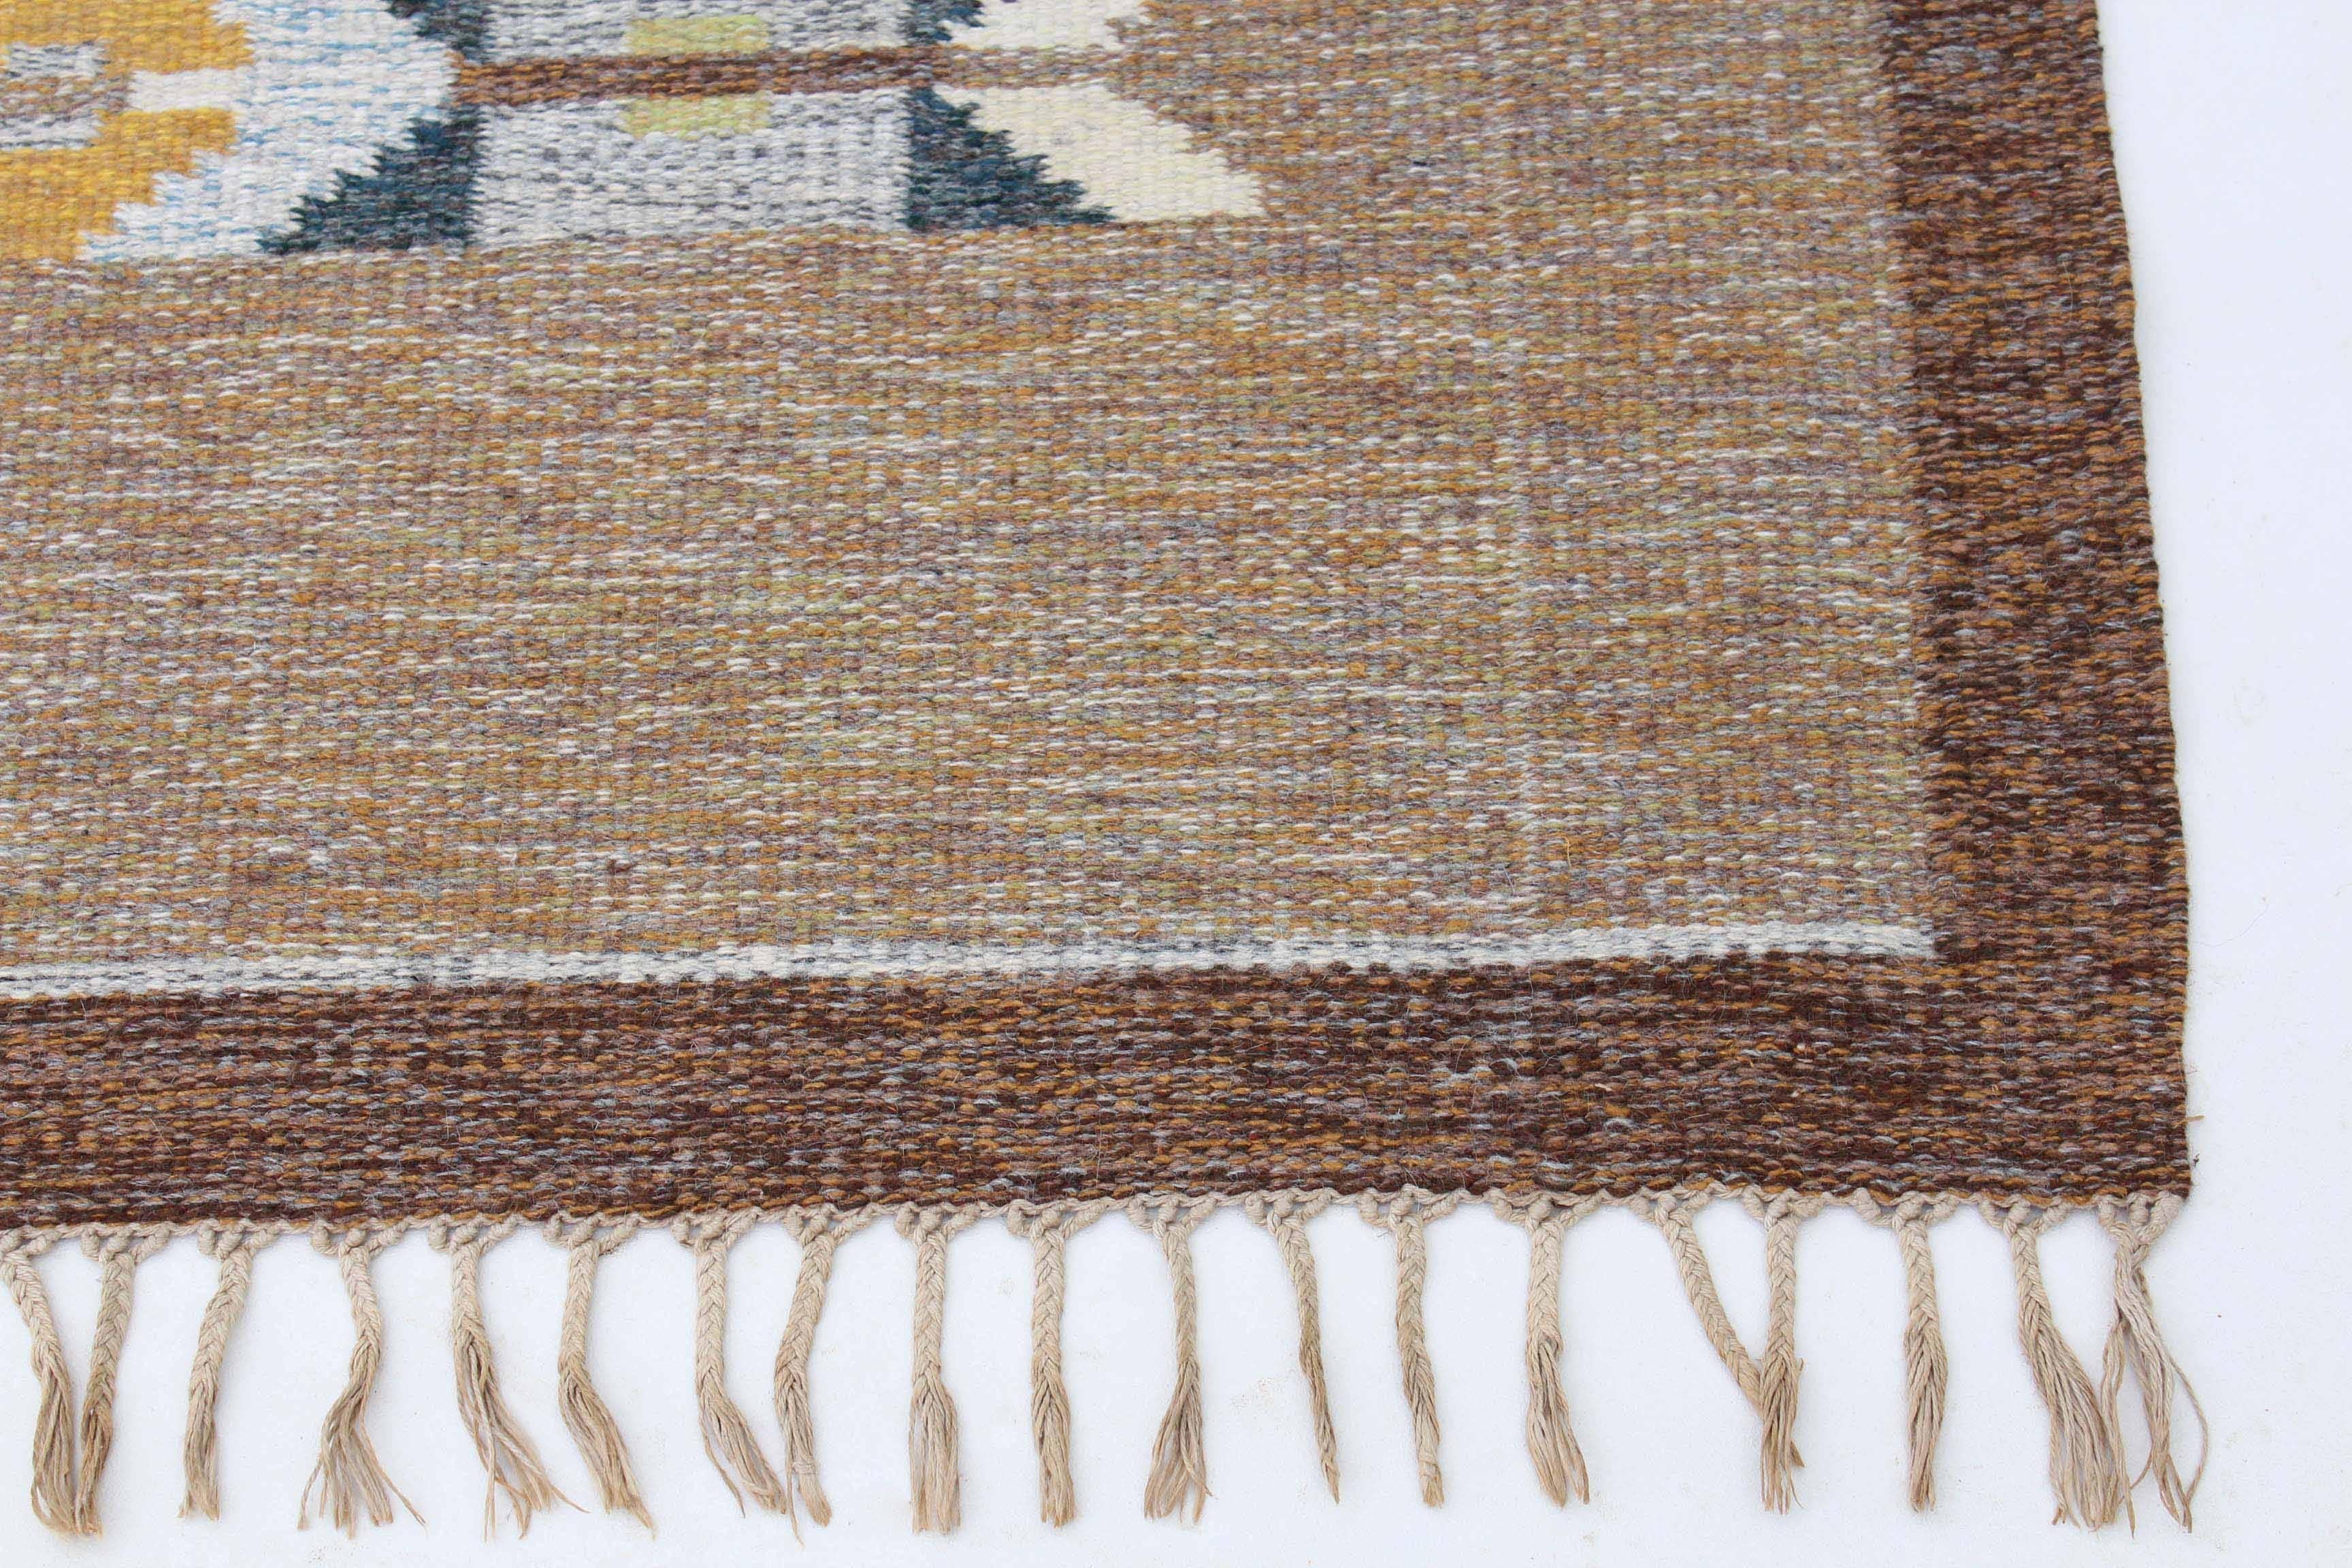 Antique large Swedish Rollakan hand flat-woven wool rug monogram signed IS (Ingegerd Silo, 1916 - 2005). Cream and brown ground.

This is a lovely quality item, that is quite rare and unusual, very different, a good pattern and colors.

We are